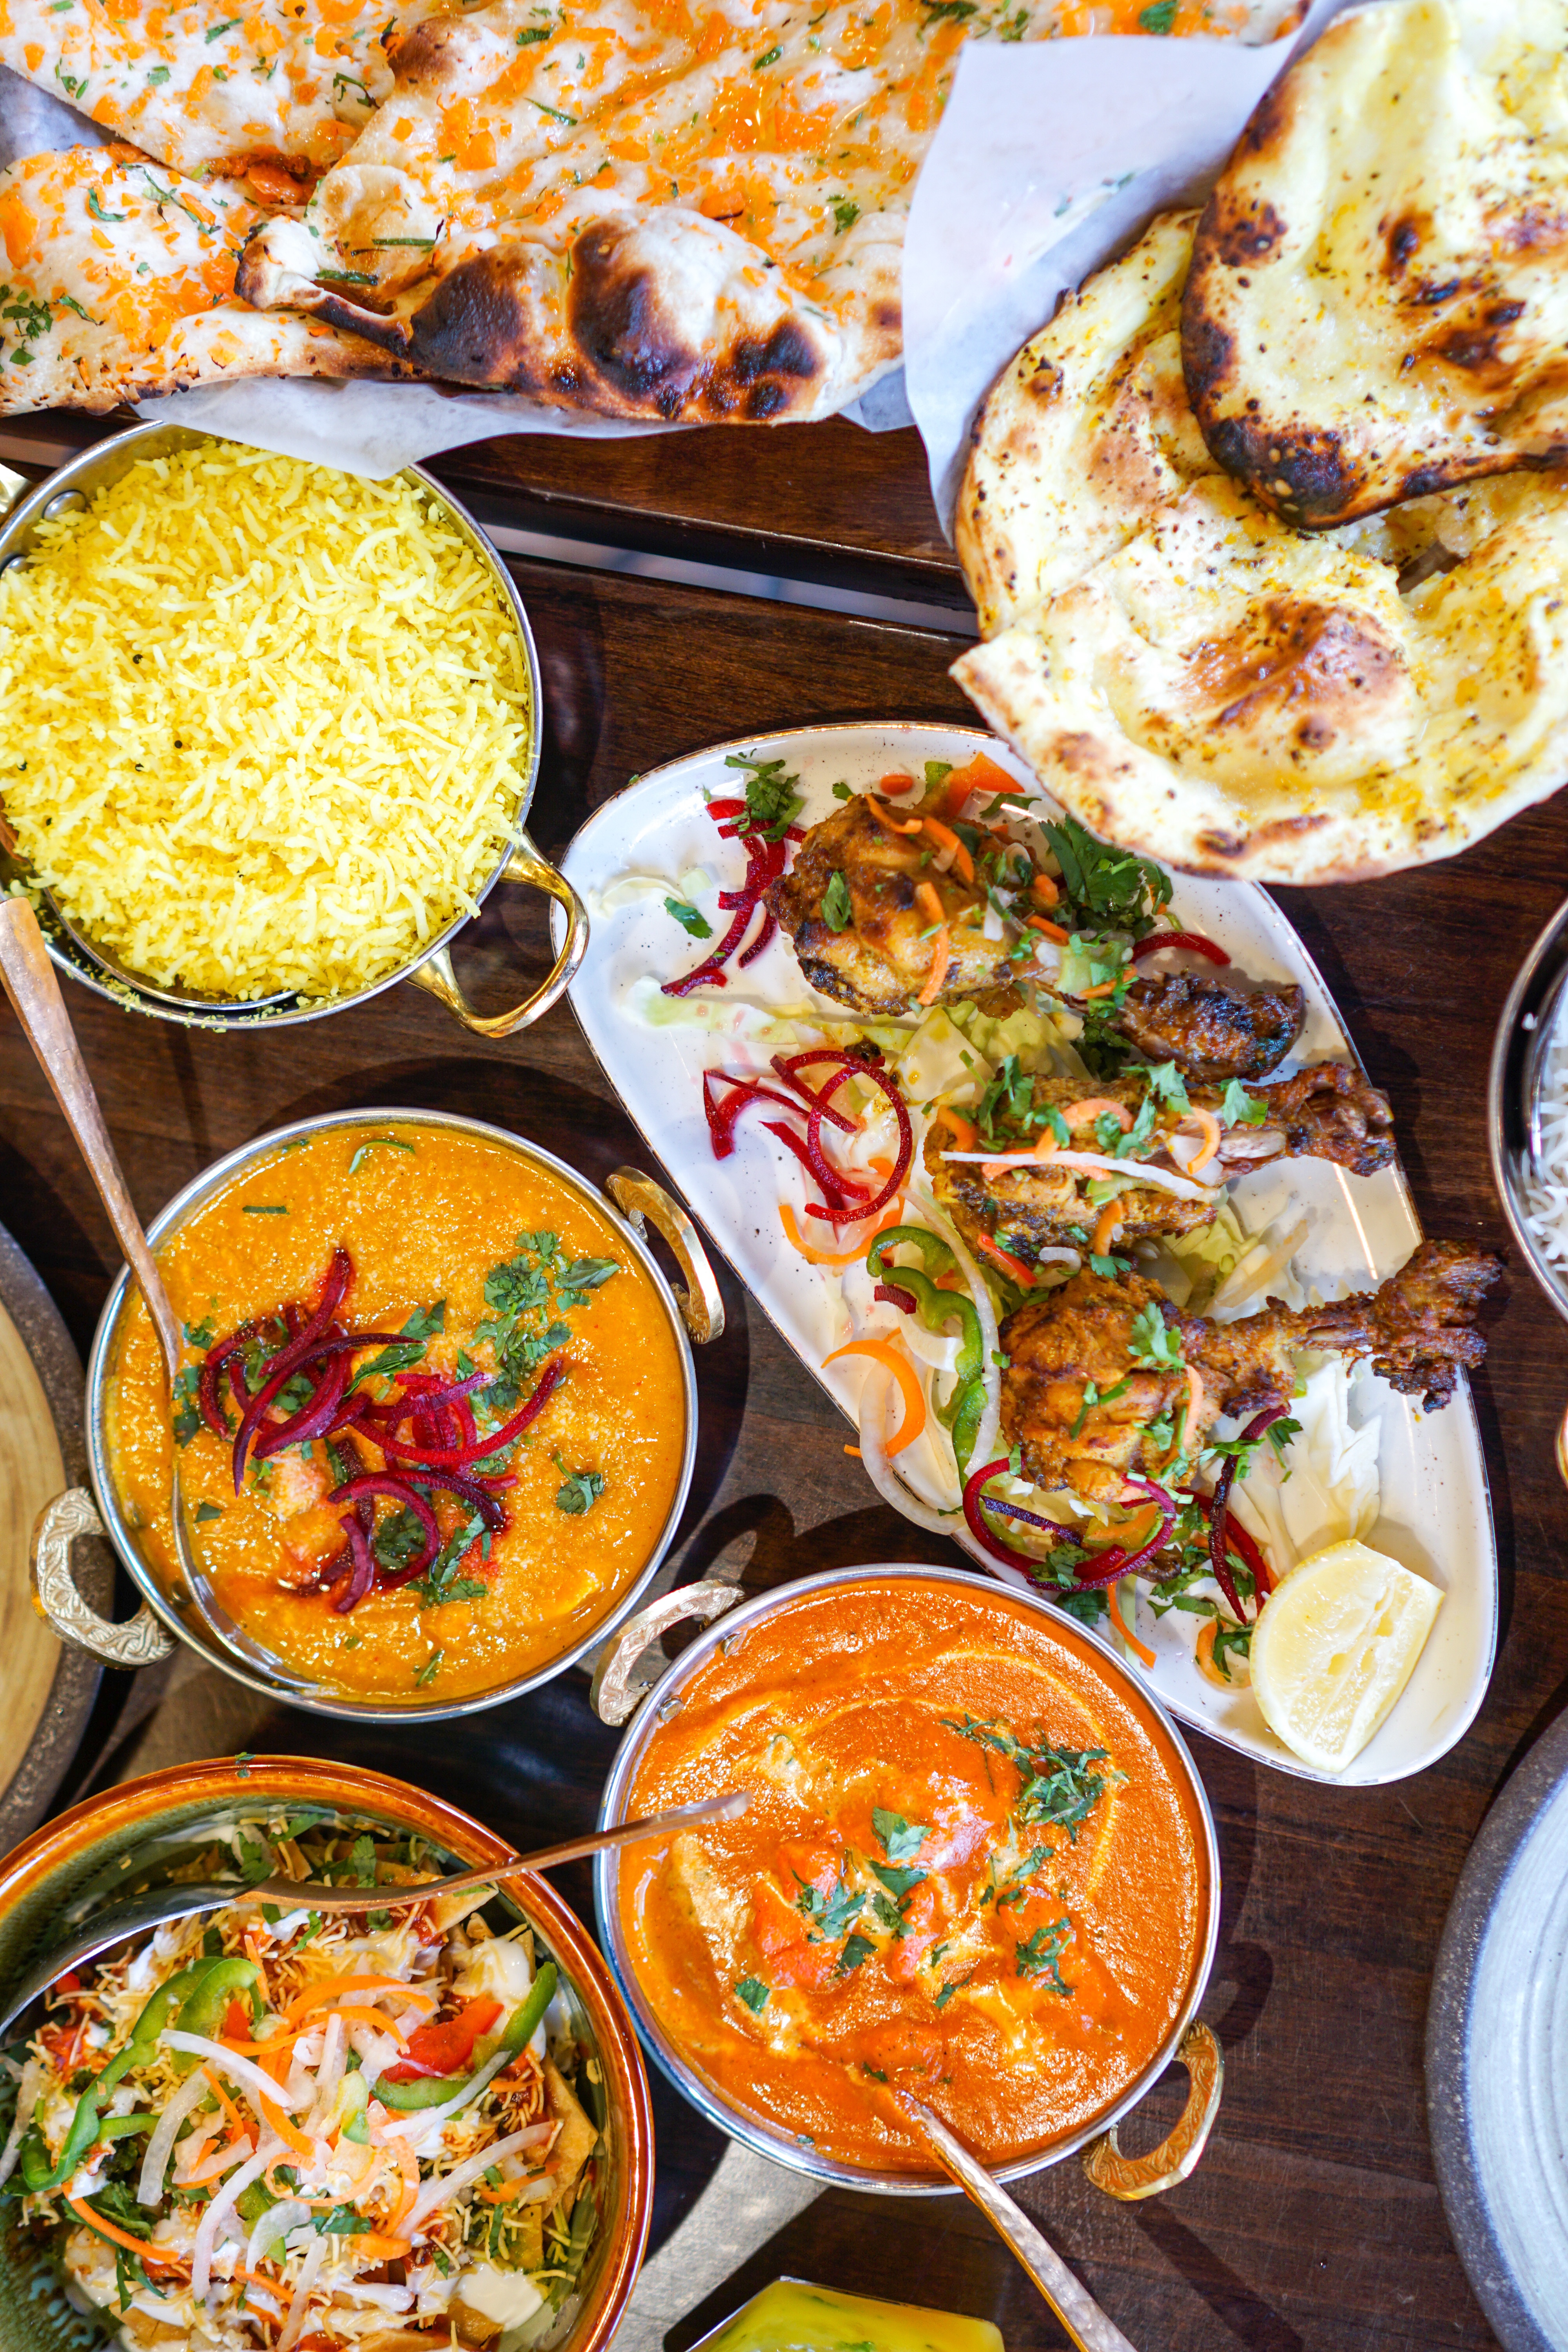 $36 Dine Out Vancouver menu at Sula Indian Restaurant